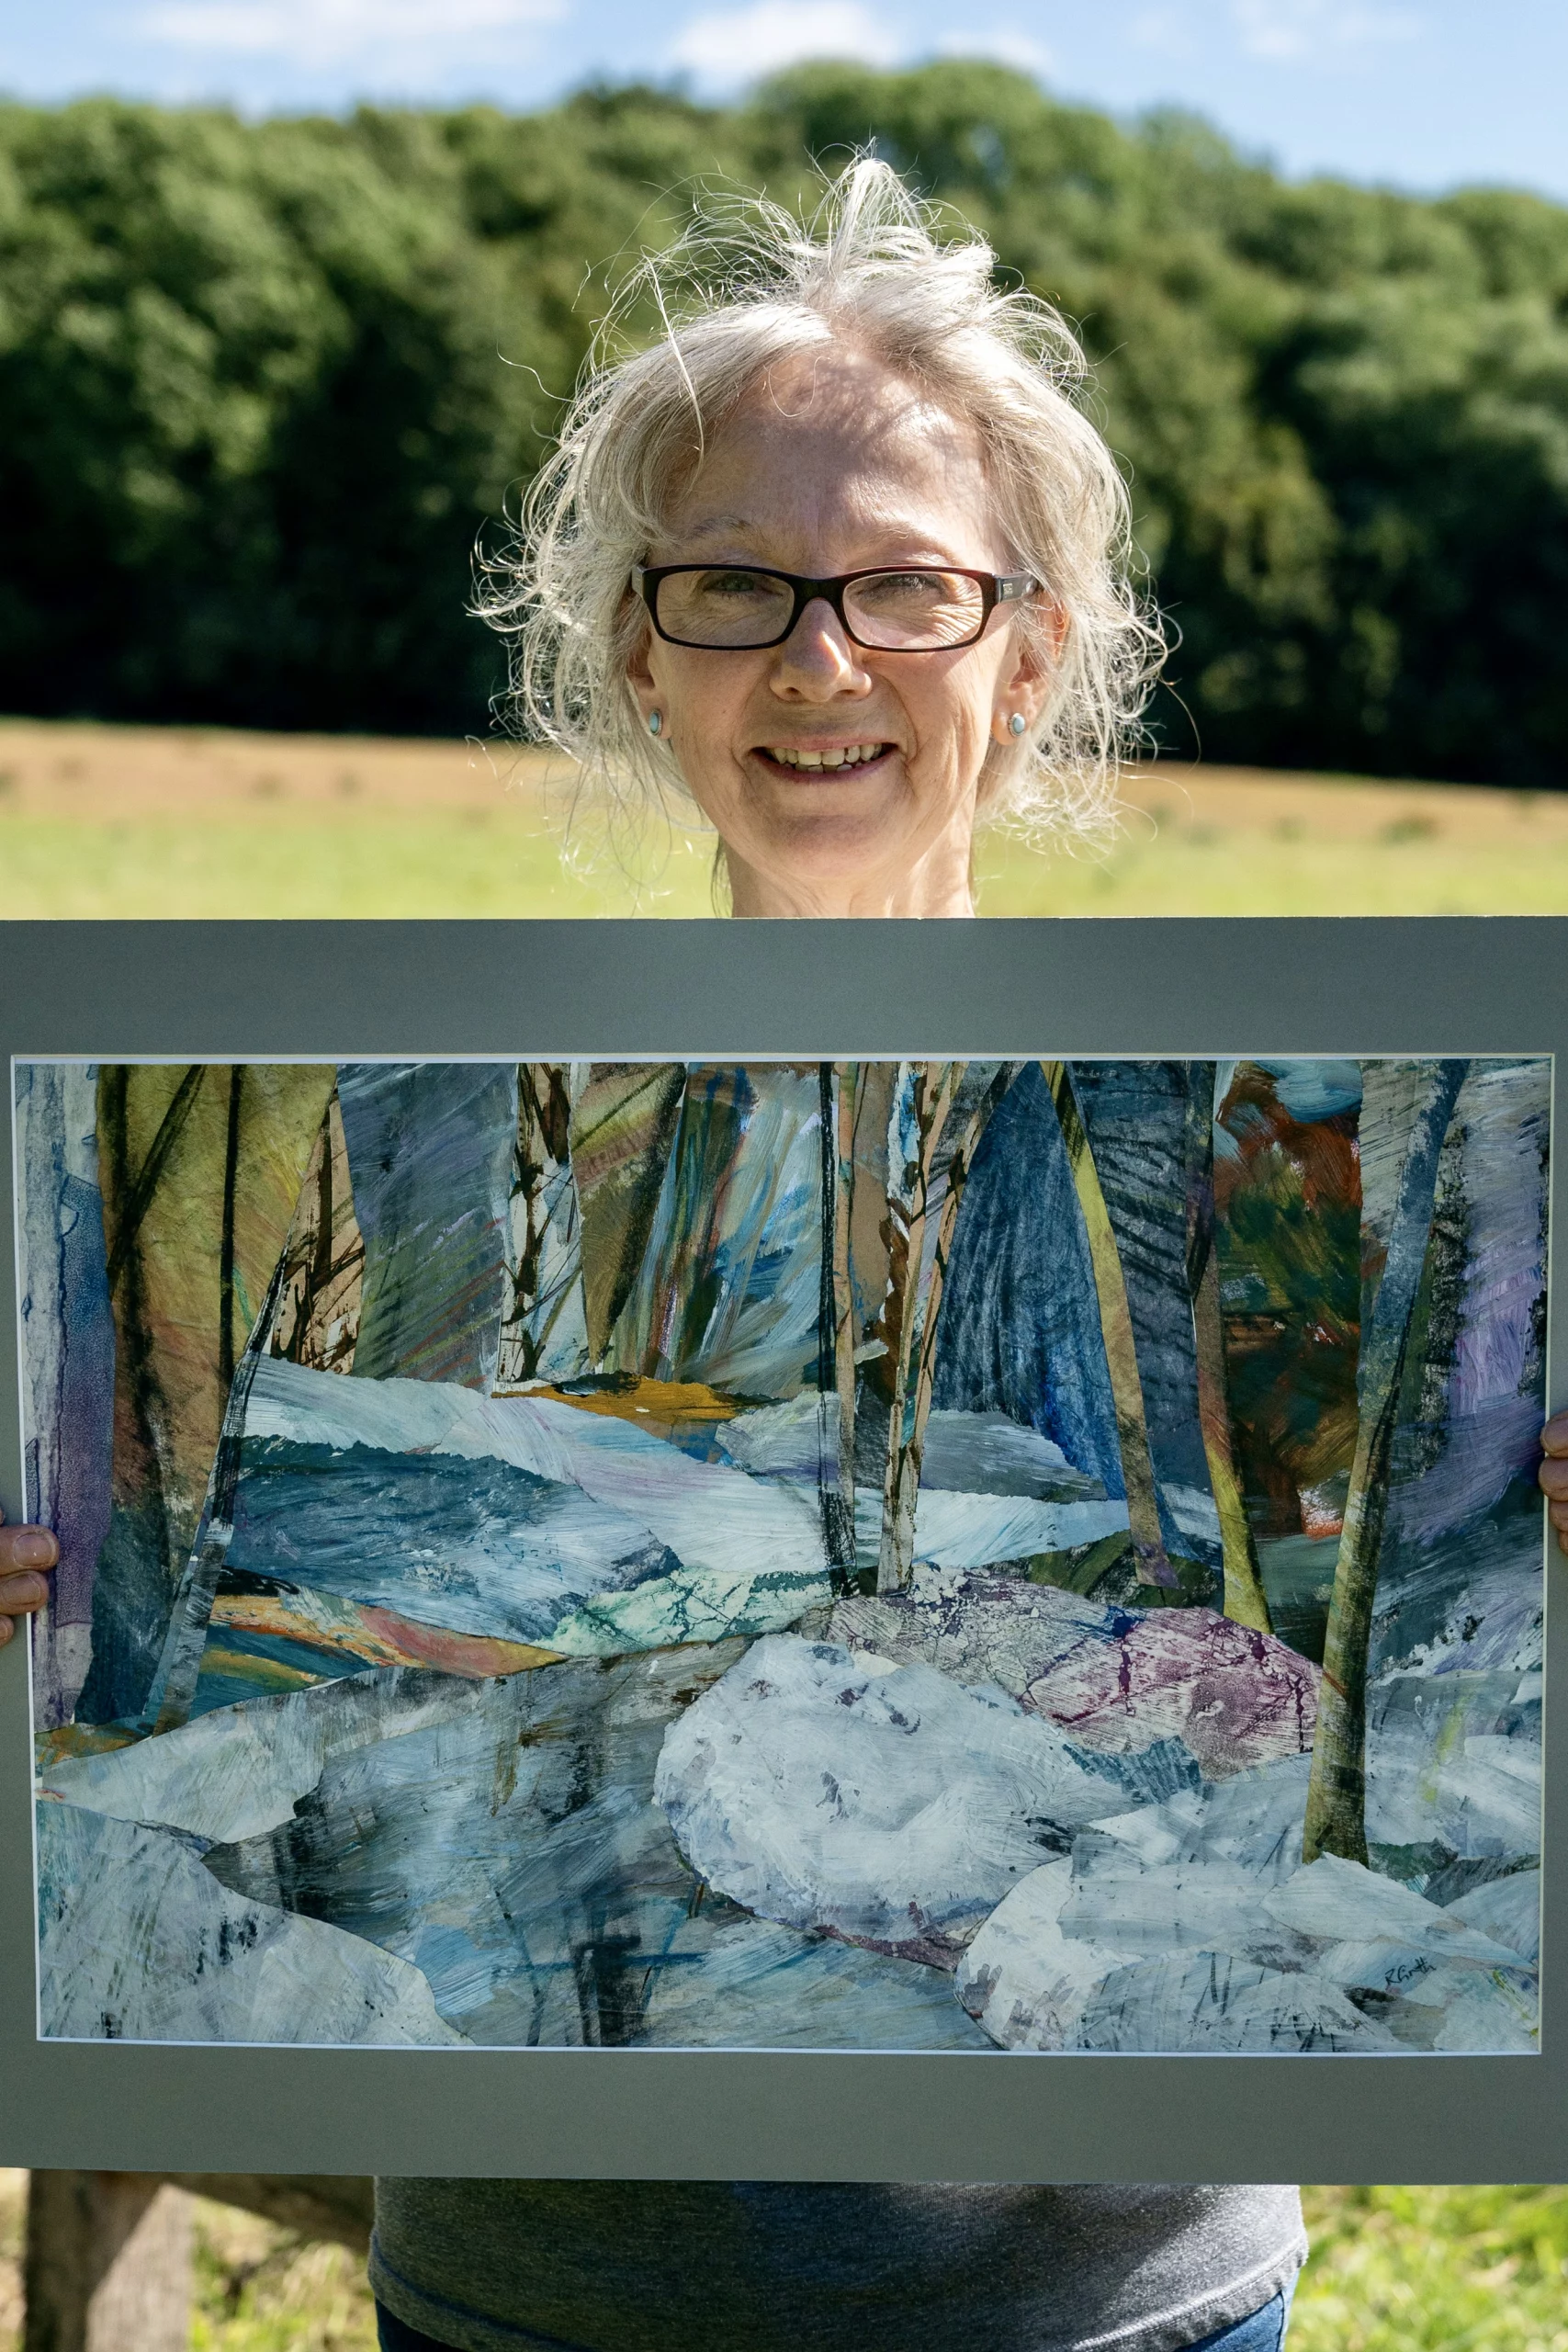 Rosemary-Firth Landscape artist of the year series